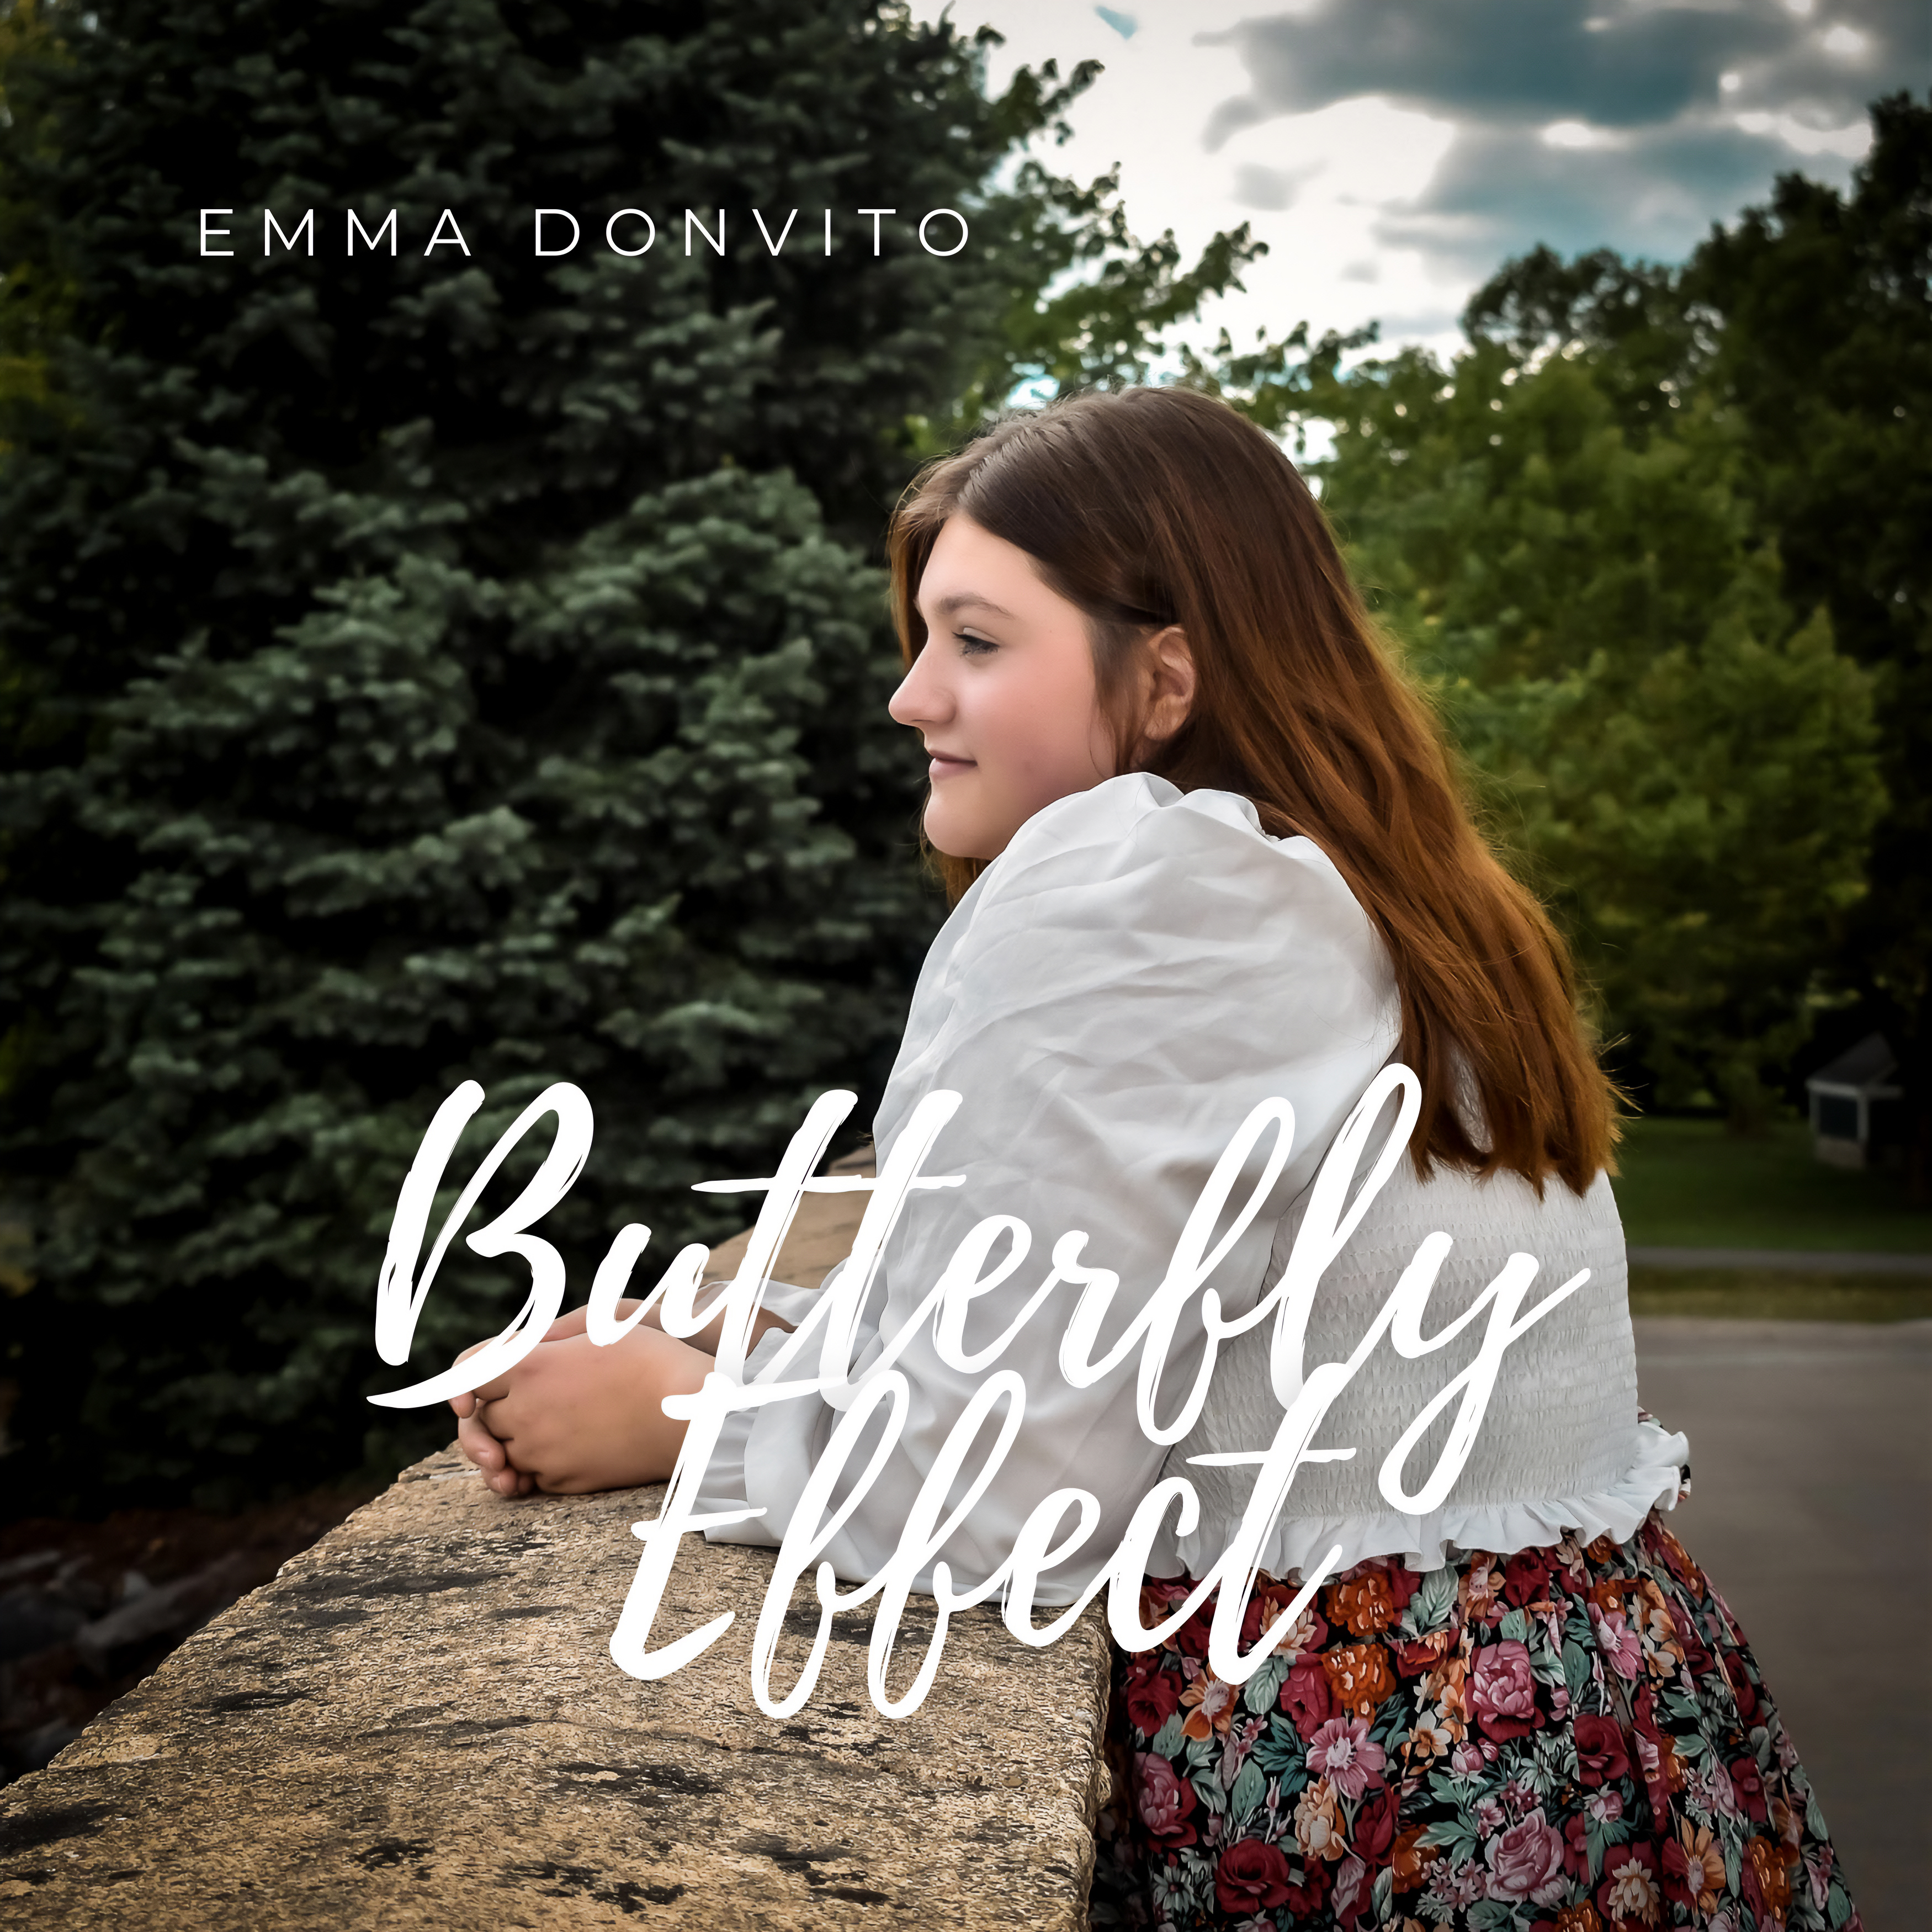 Emma Donvito releases her first album, Butterfly Effect